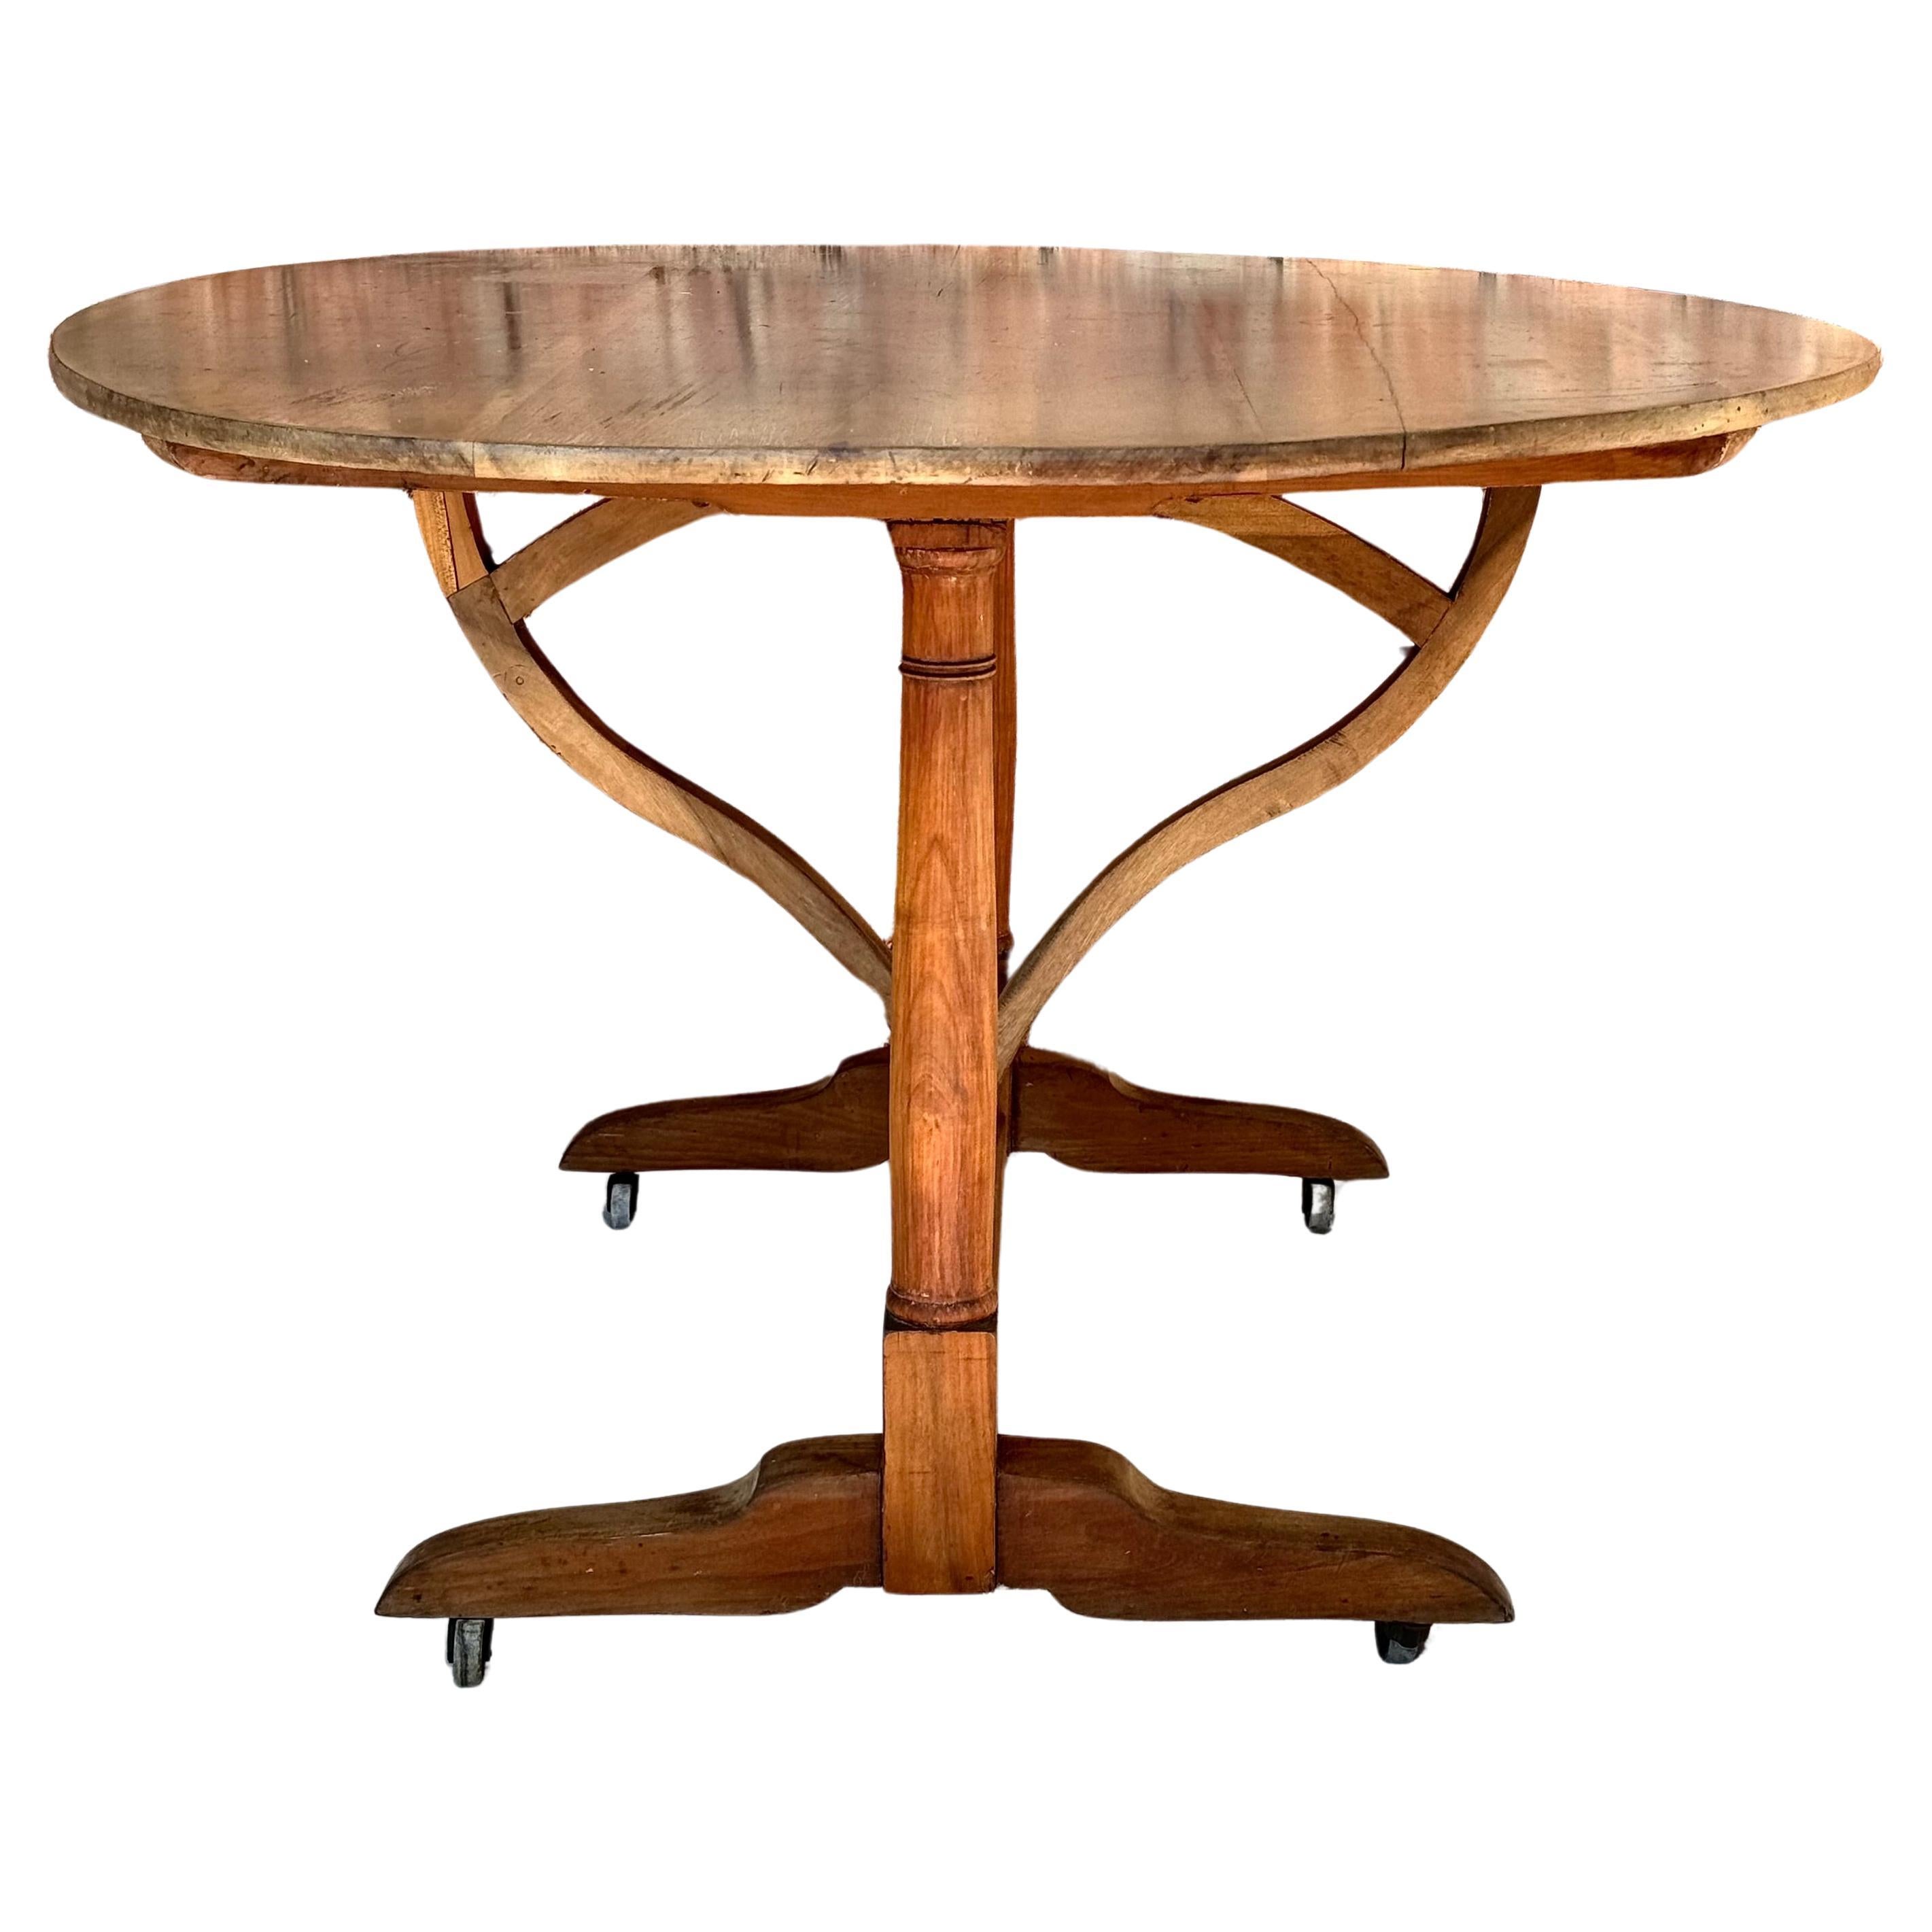 Large 19th Century French Wine Tasting Table